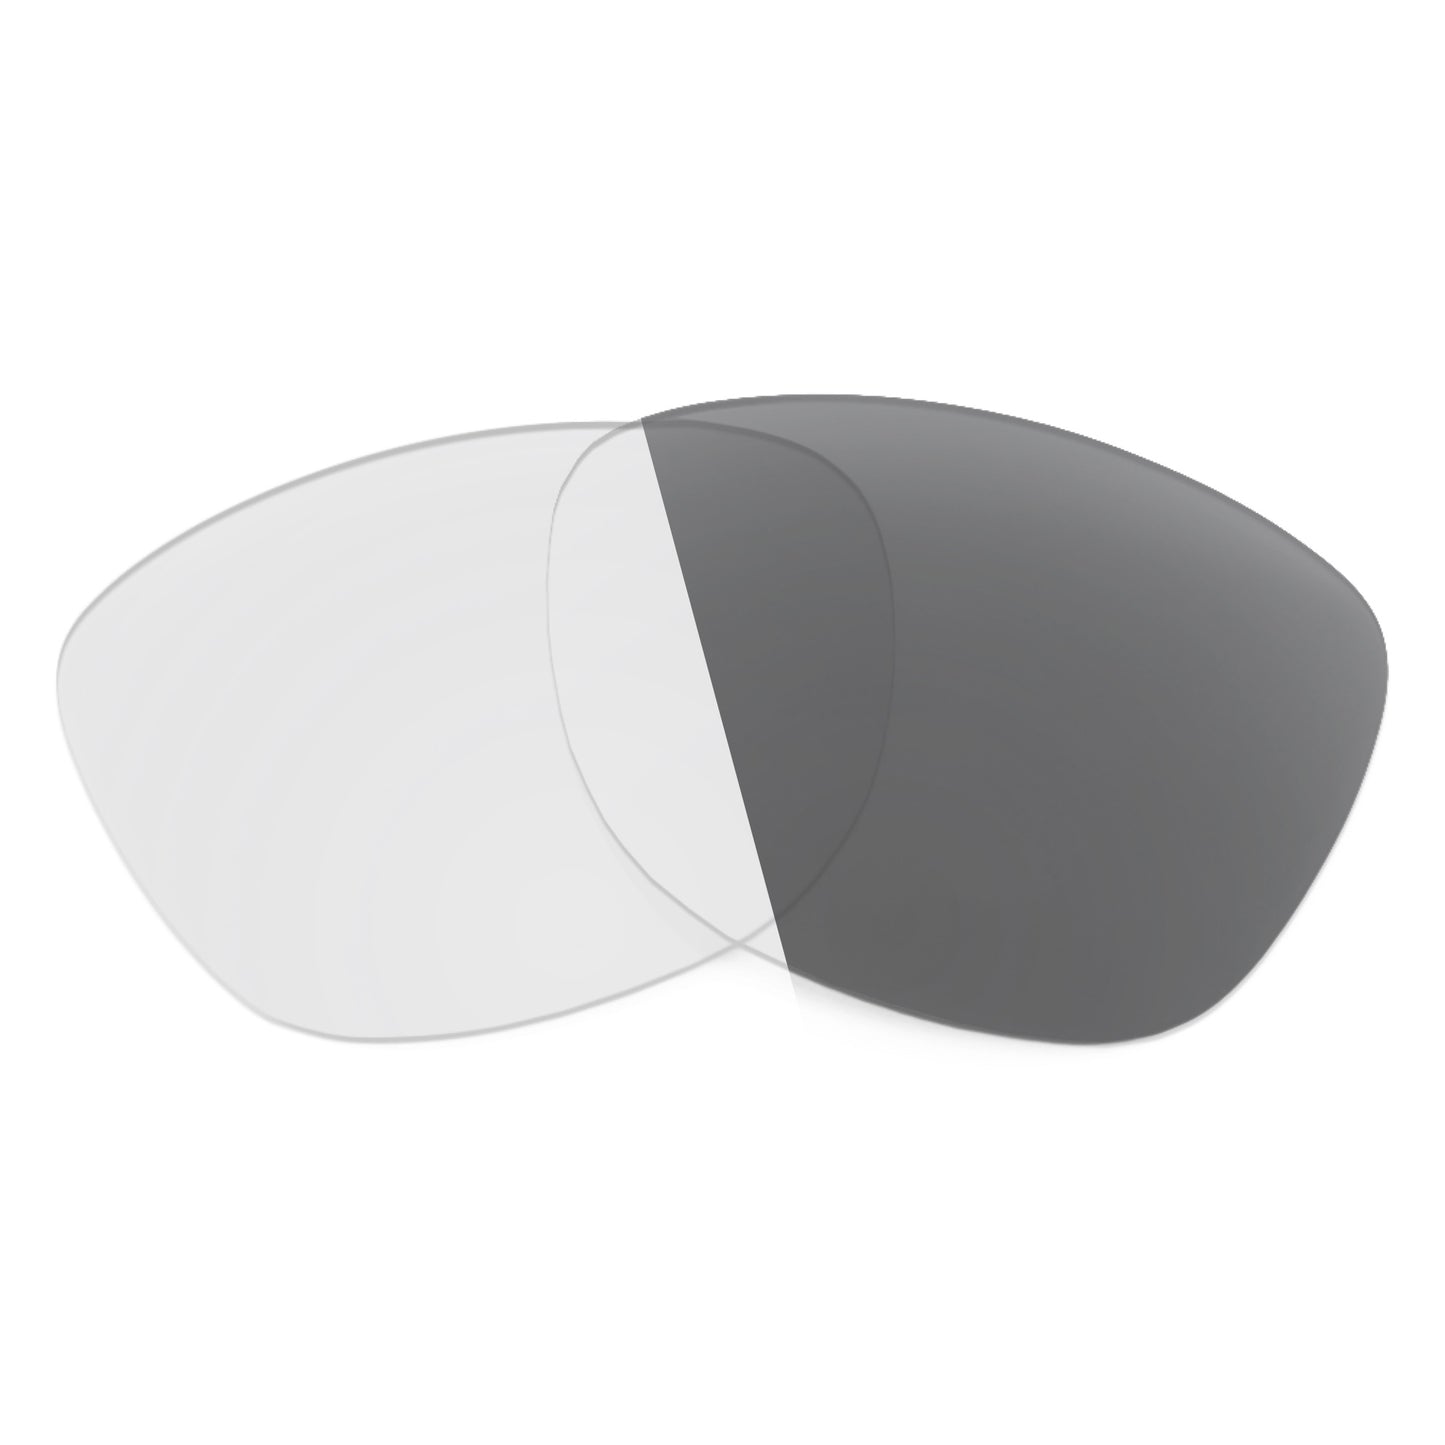 Revant replacement lenses for Ray-Ban Hexagonal RB3548N 51mm Non-Polarized Adapt Gray Photochromic